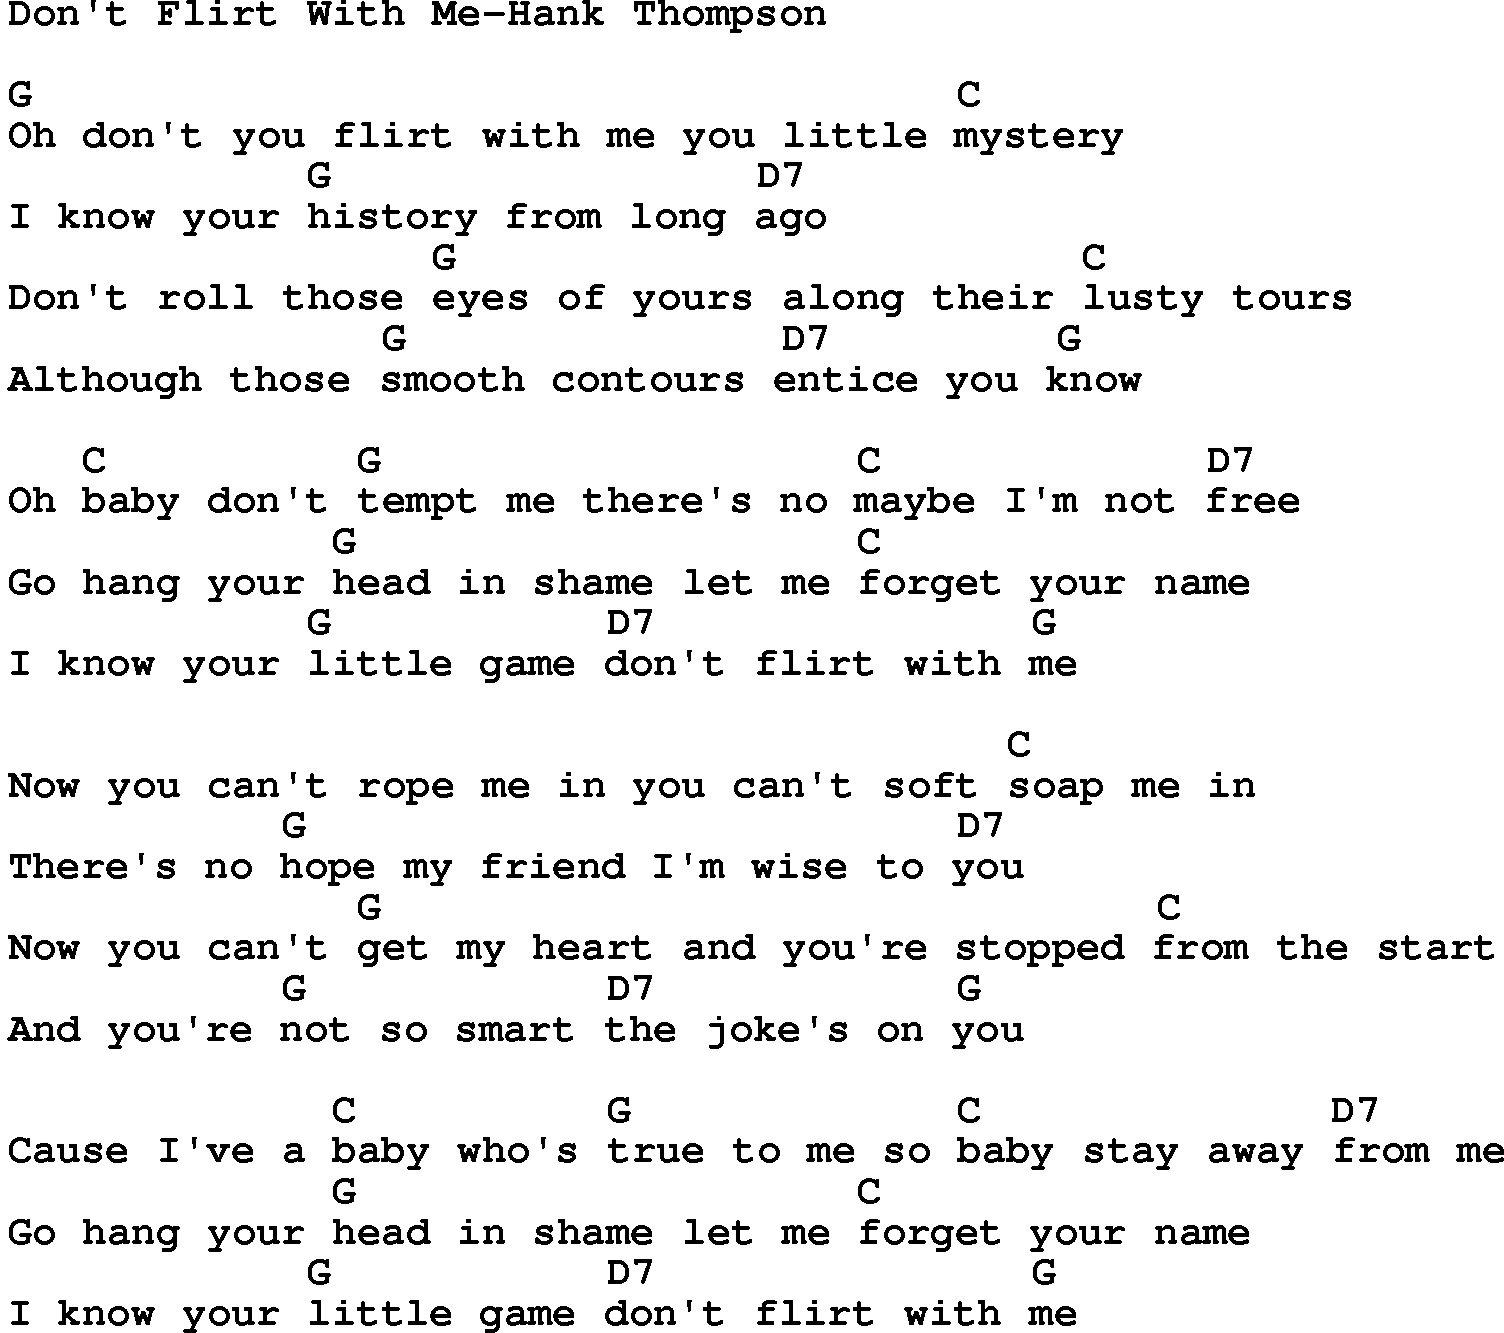 Country music song: Don't Flirt With Me-Hank Thompson lyrics and chords